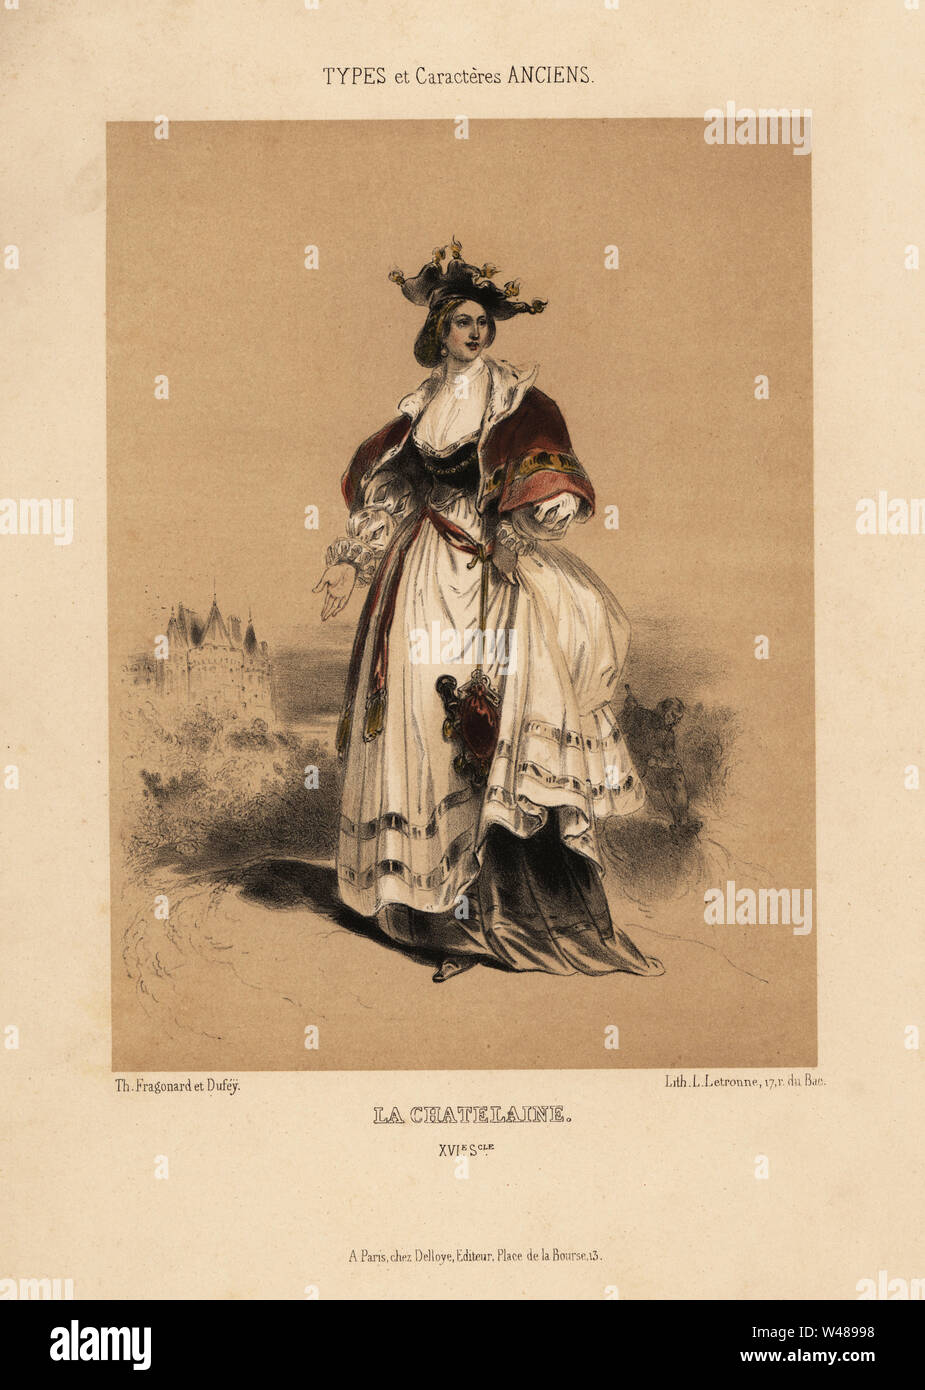 La Chatelaine, 16th century. Dutch woman wearing a chatelaine belt clasp with purse, keys, etc., hanging from it. The chatelaine was a fashion item in Zeeland in the 16th century. Chromolithograph by Louis Rene Letronne after an illustration by Th. Fragonard et Dufey from Le Keepsake Francais with 12 plates from A. Mazuy’s Types et Caracteres Anciens, d’apres des Documents Peints ou Ecrits, chez Delloye, Paris, 1841. Stock Photo